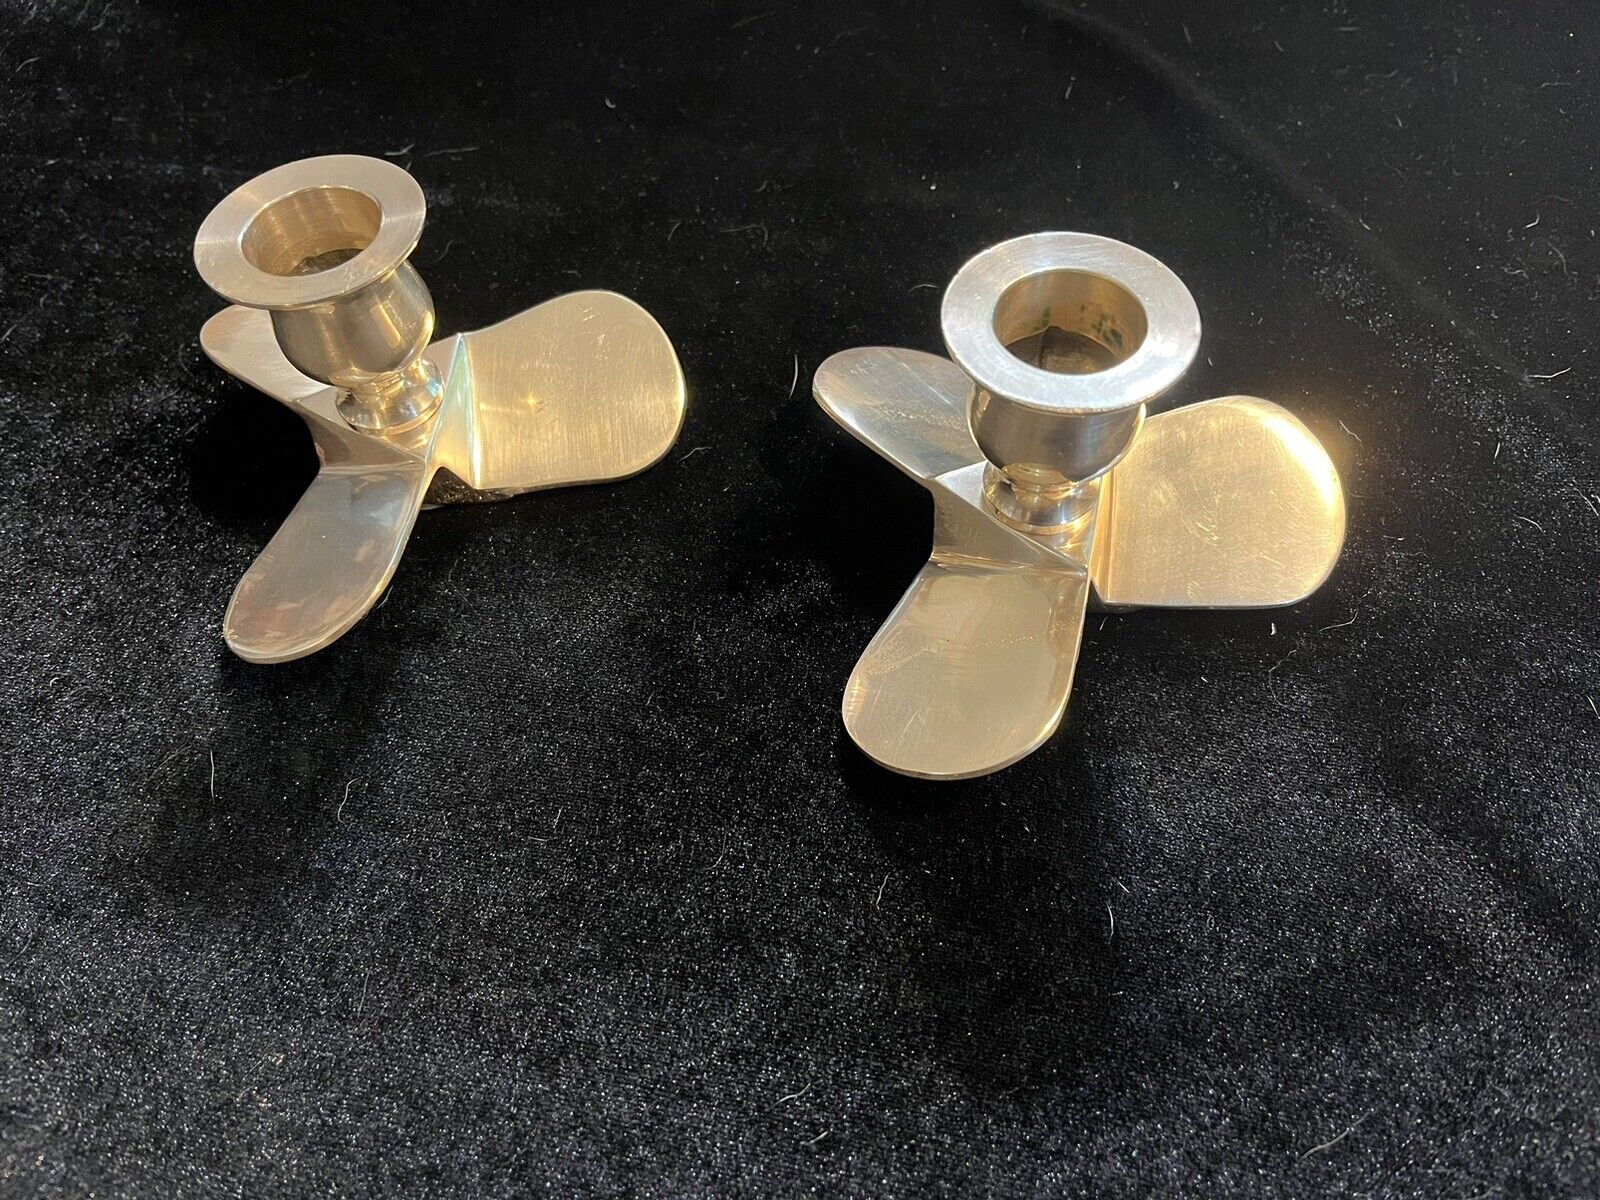 Set of 2 Beautiful Solid Brass Nautical Boat Propeller Candle Holders. Polished